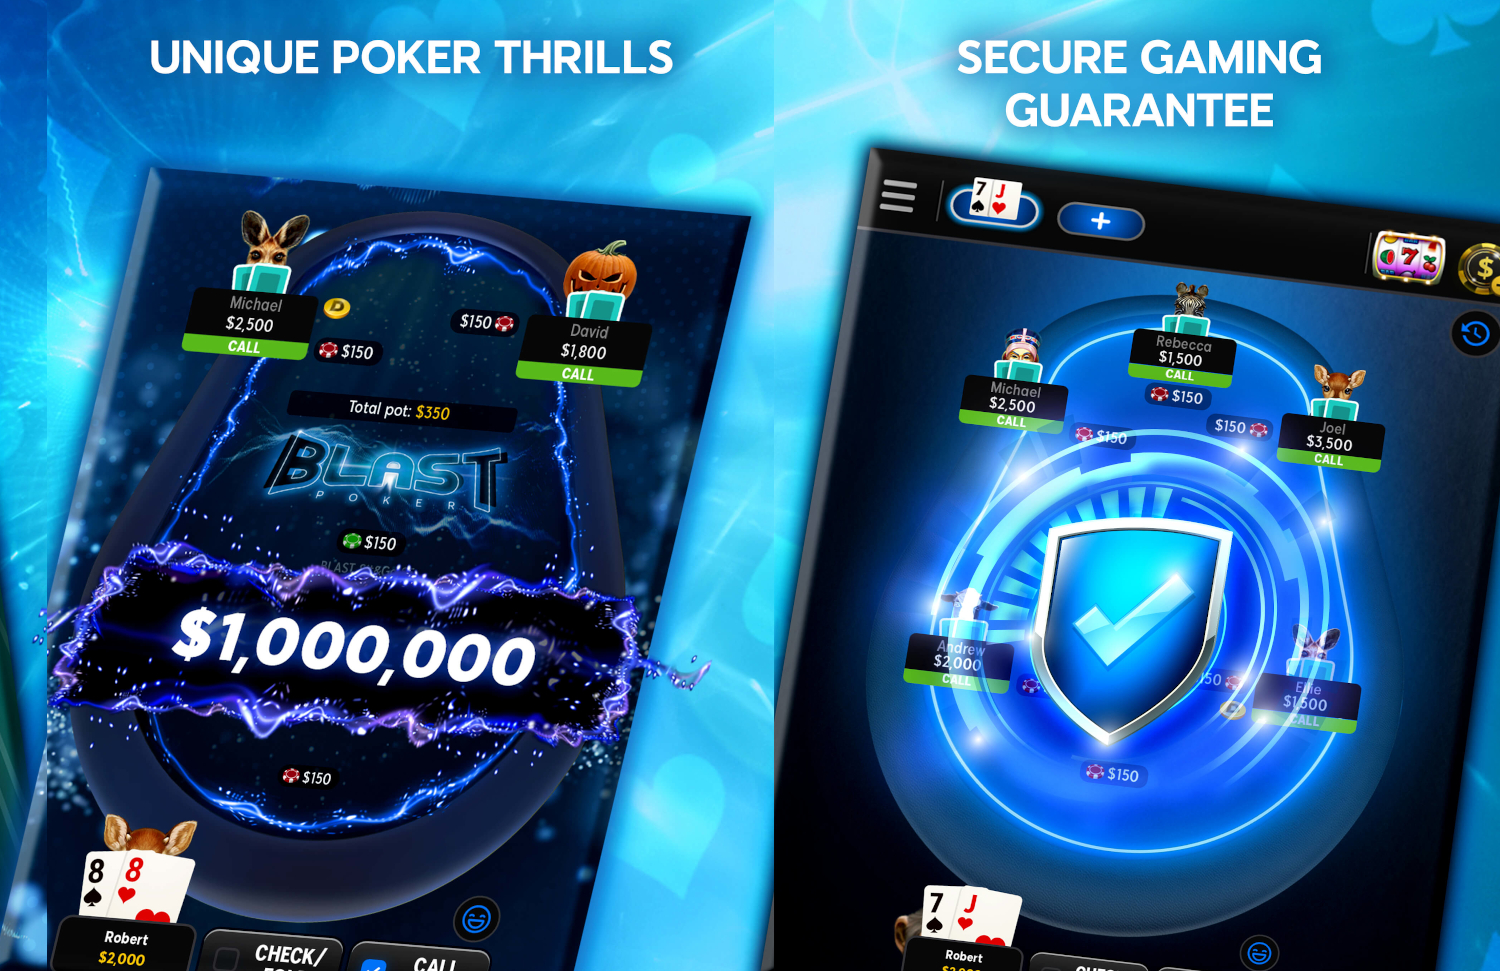 Made To Play, for people who love poker!